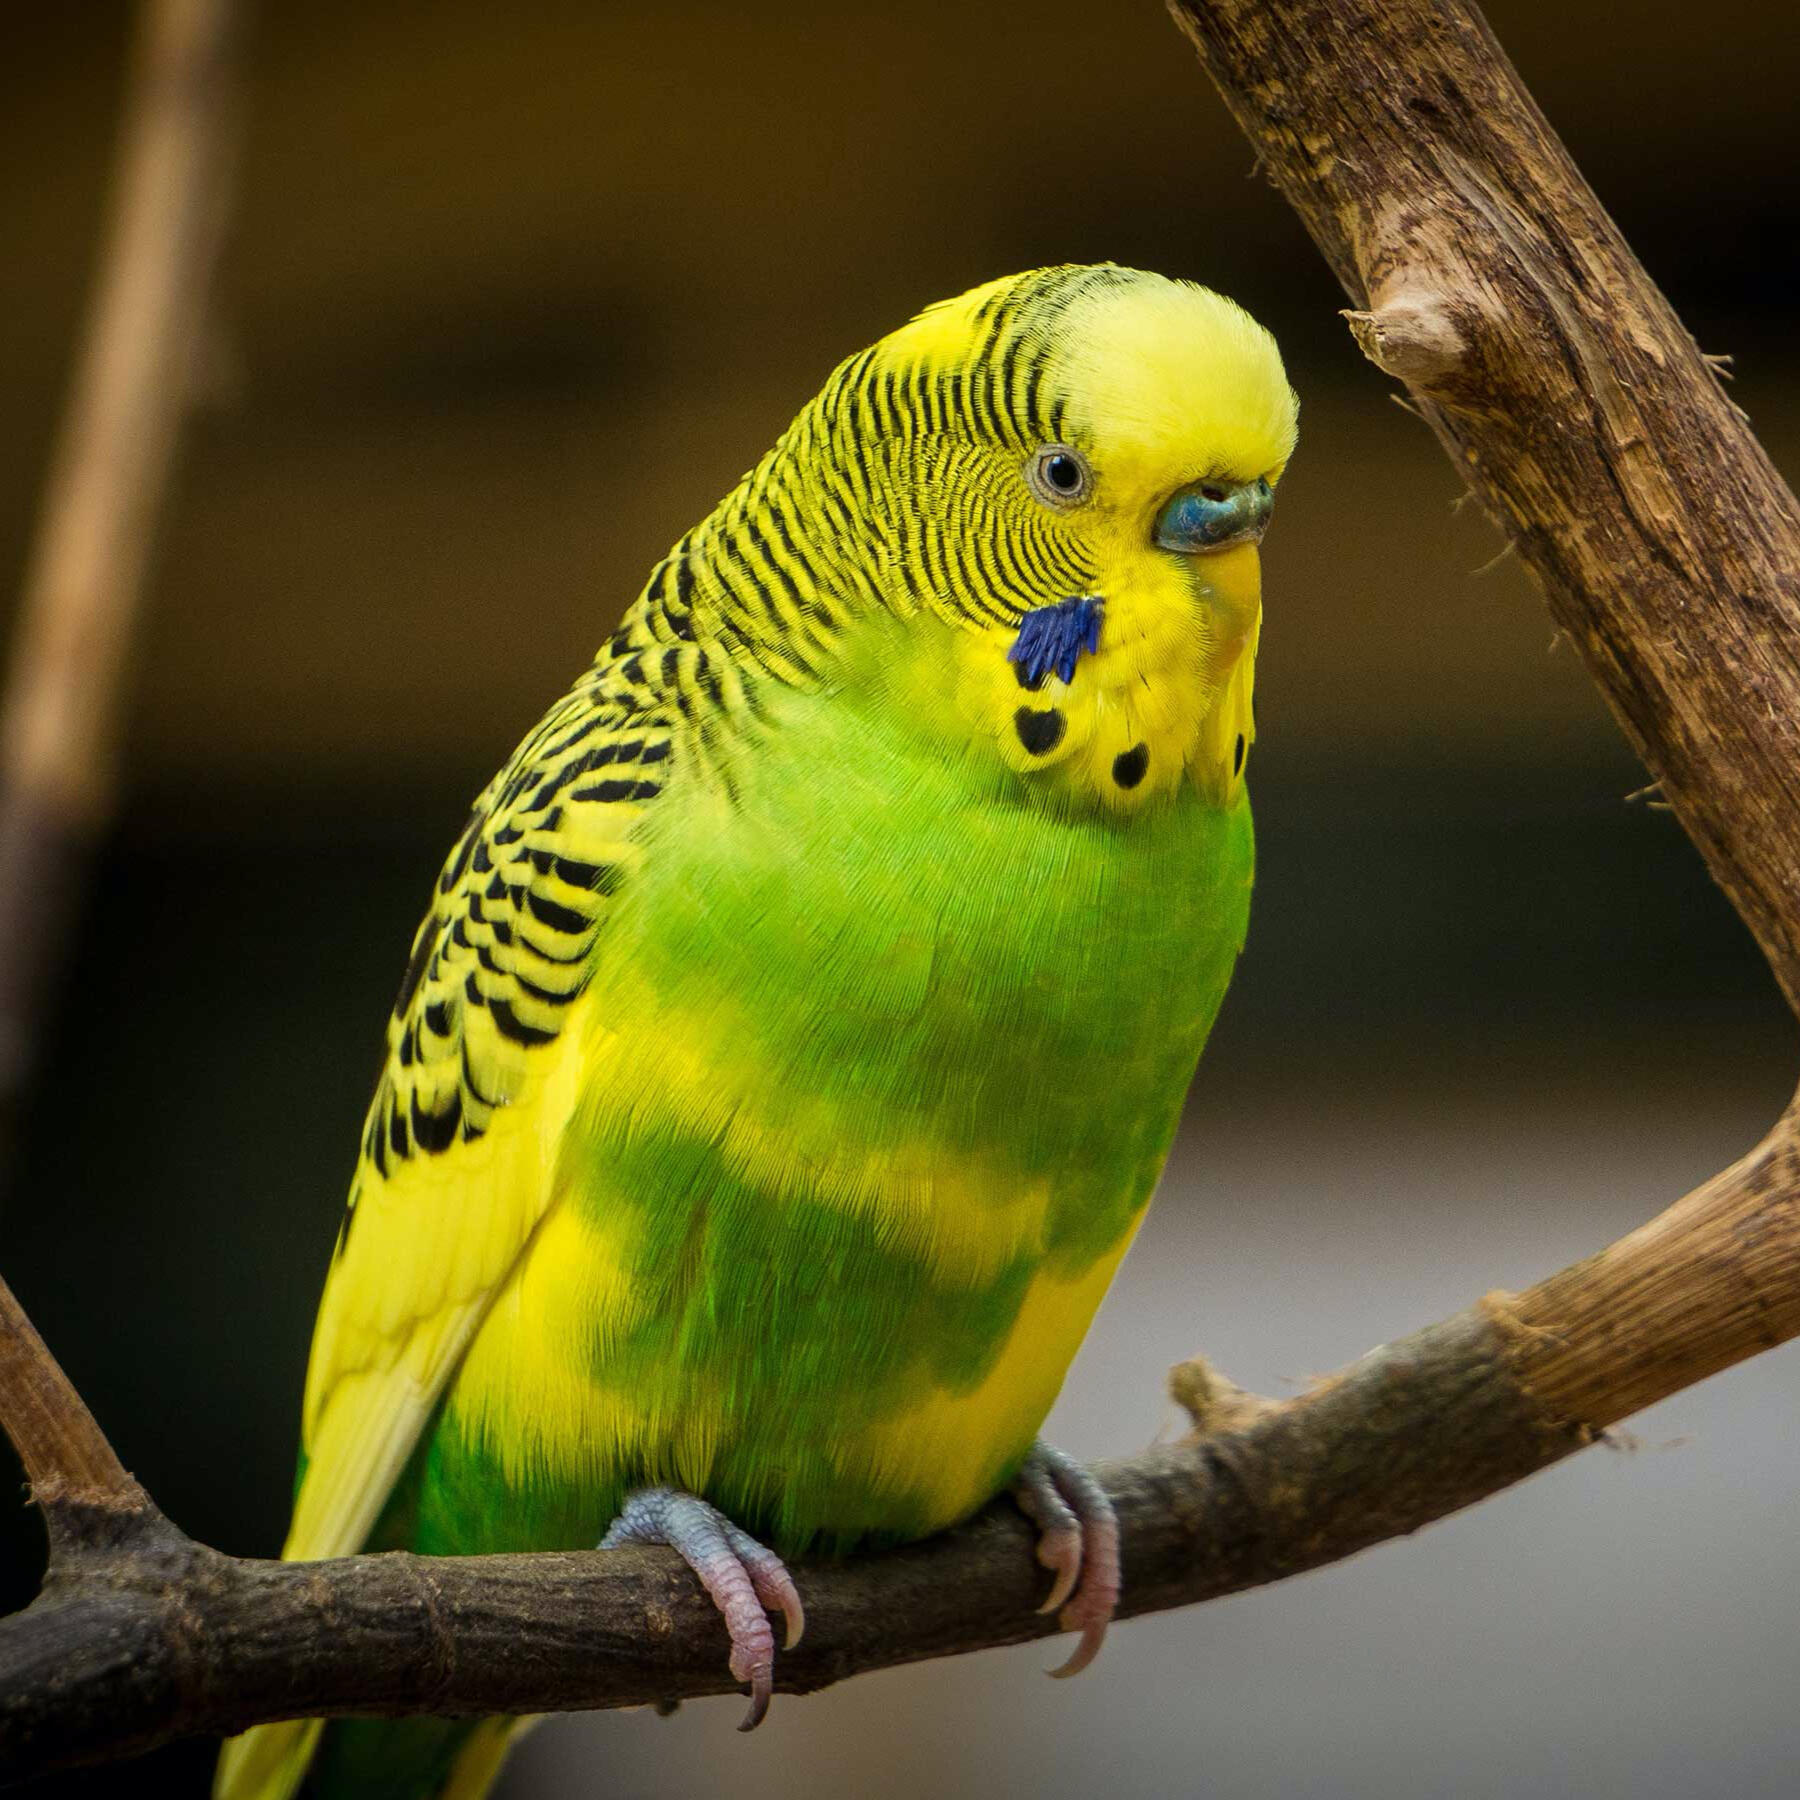 A yellow and green parakeet sitting on a branch.